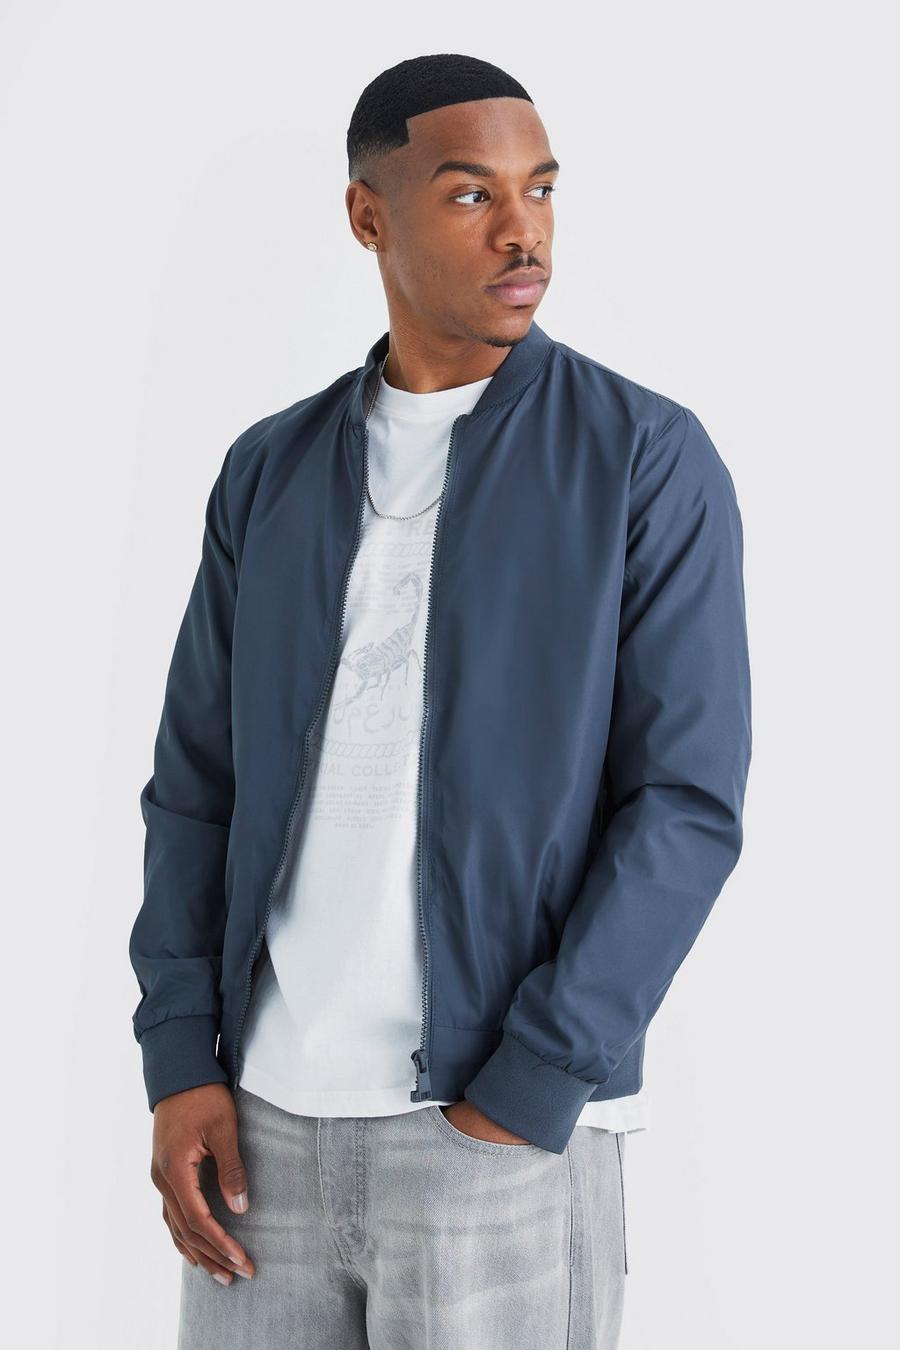 Giacca Bomber Basic in nylon, Charcoal gris